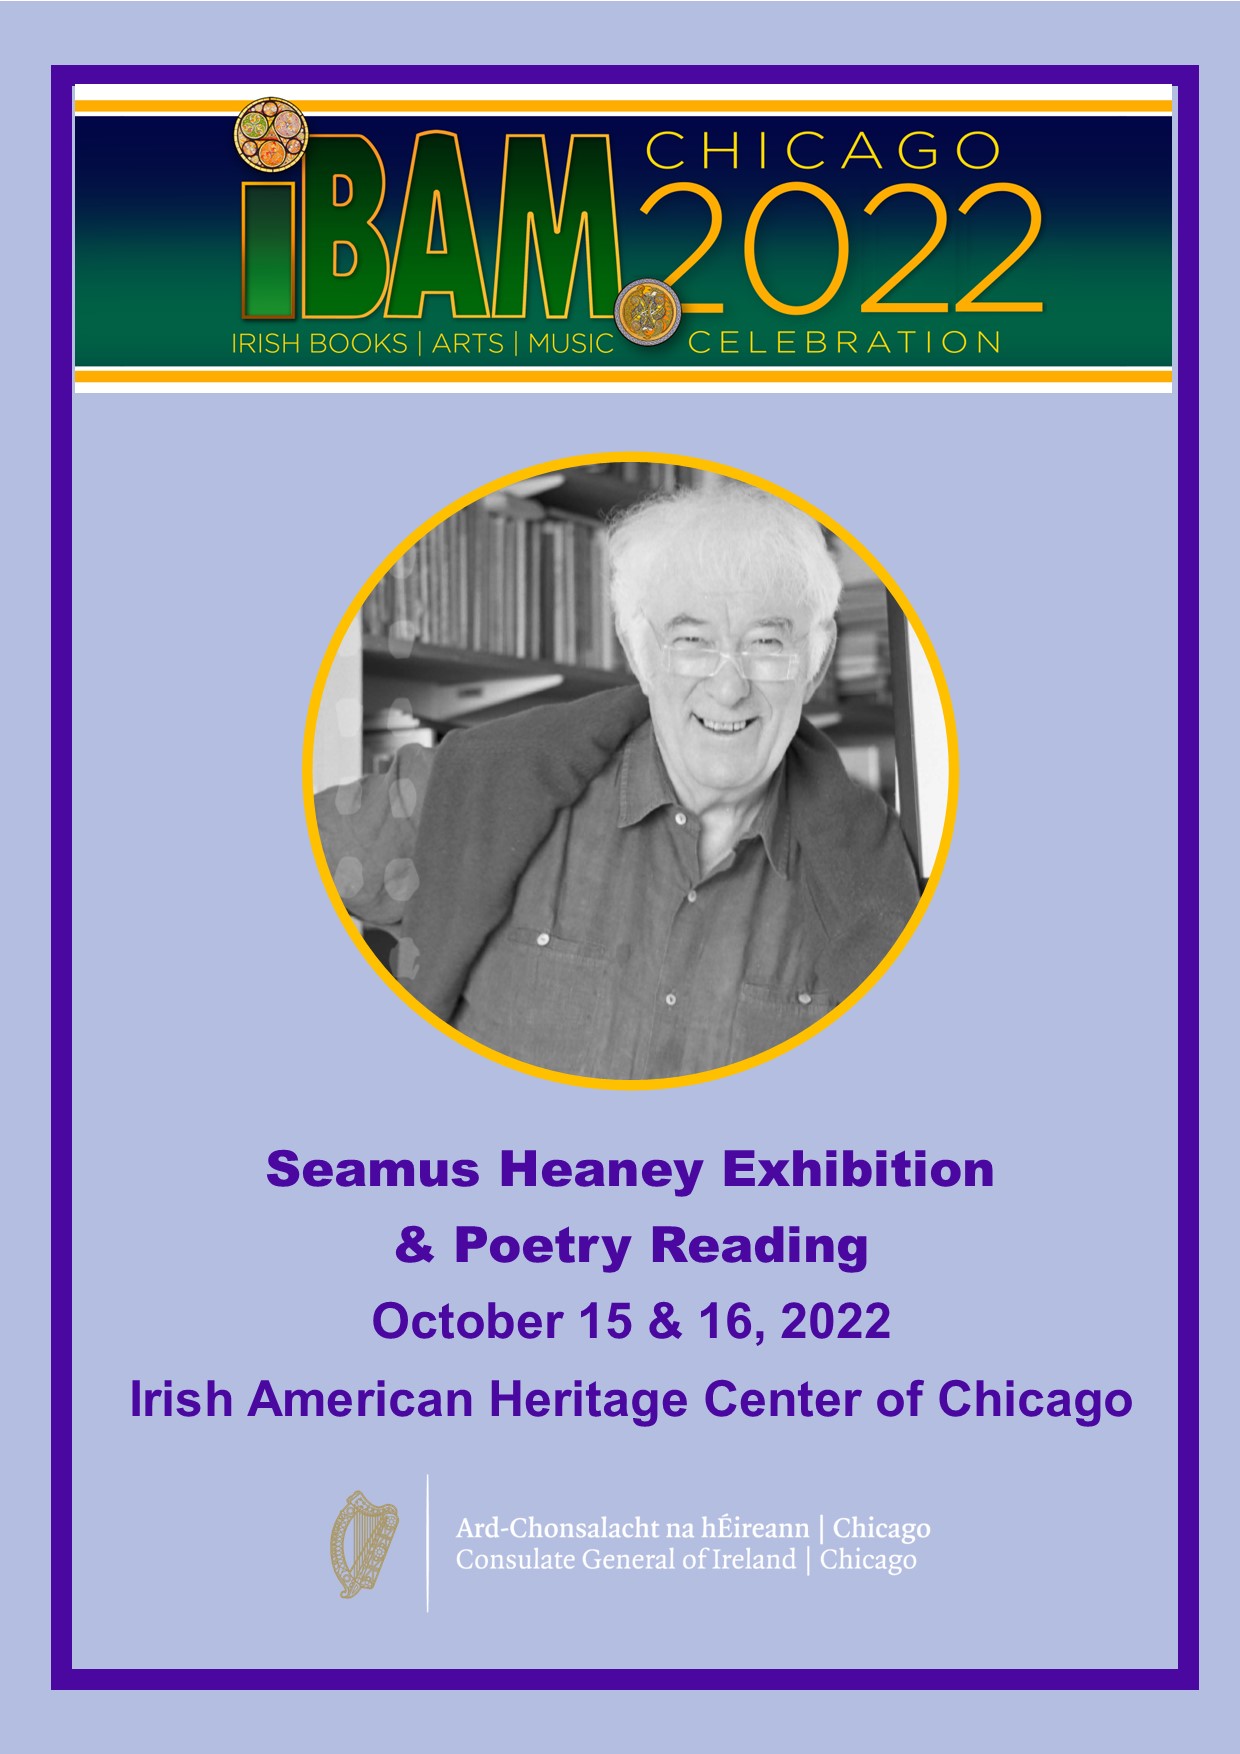 Seamus Heaney Exhibition at iBAM! 2022 Oct 15 & 16